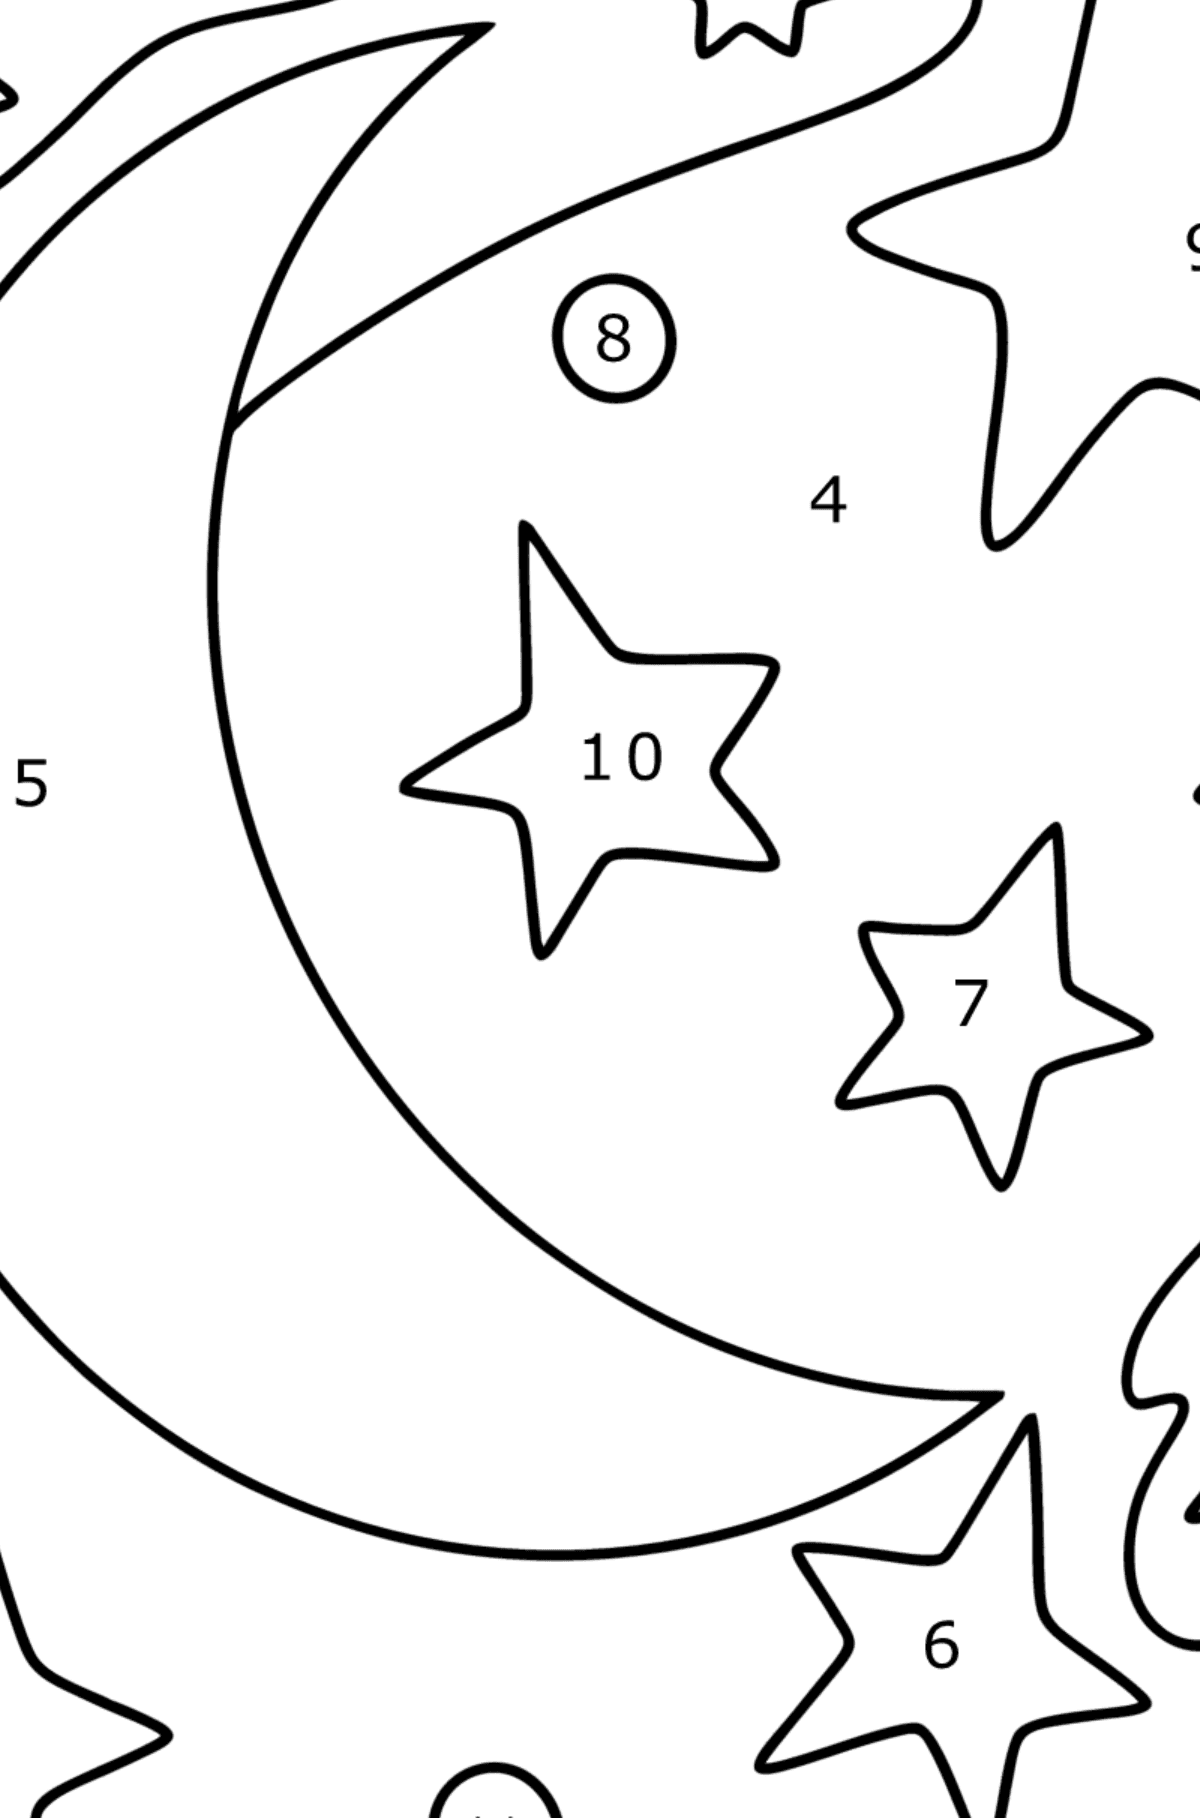 Coloring page moon and stars - Coloring by Numbers for Kids